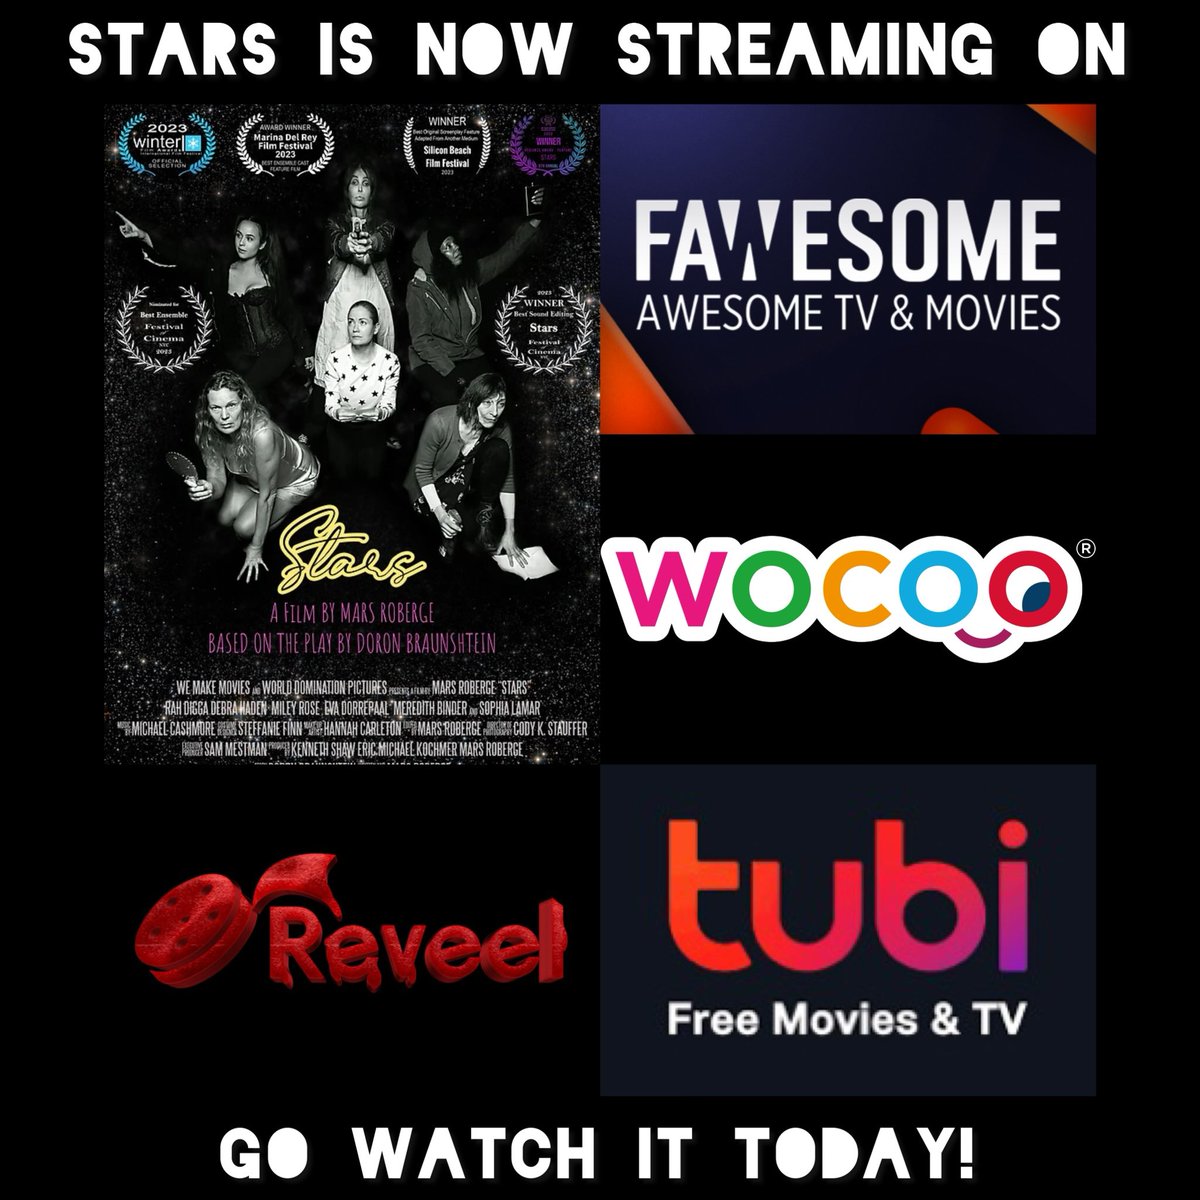 Go watch “Stars” on Roku, Fire TV, Android TV, Google Play, Apple TV, and IOS by using the Tubi. Fawesome or Reveel app or directly on WOCOO.tv. 

@stars_themovie @wemakemovies  @watchreveel @tubi #fawesomettv #worlddominationpictures @wocoo_movies @wocoo.tv